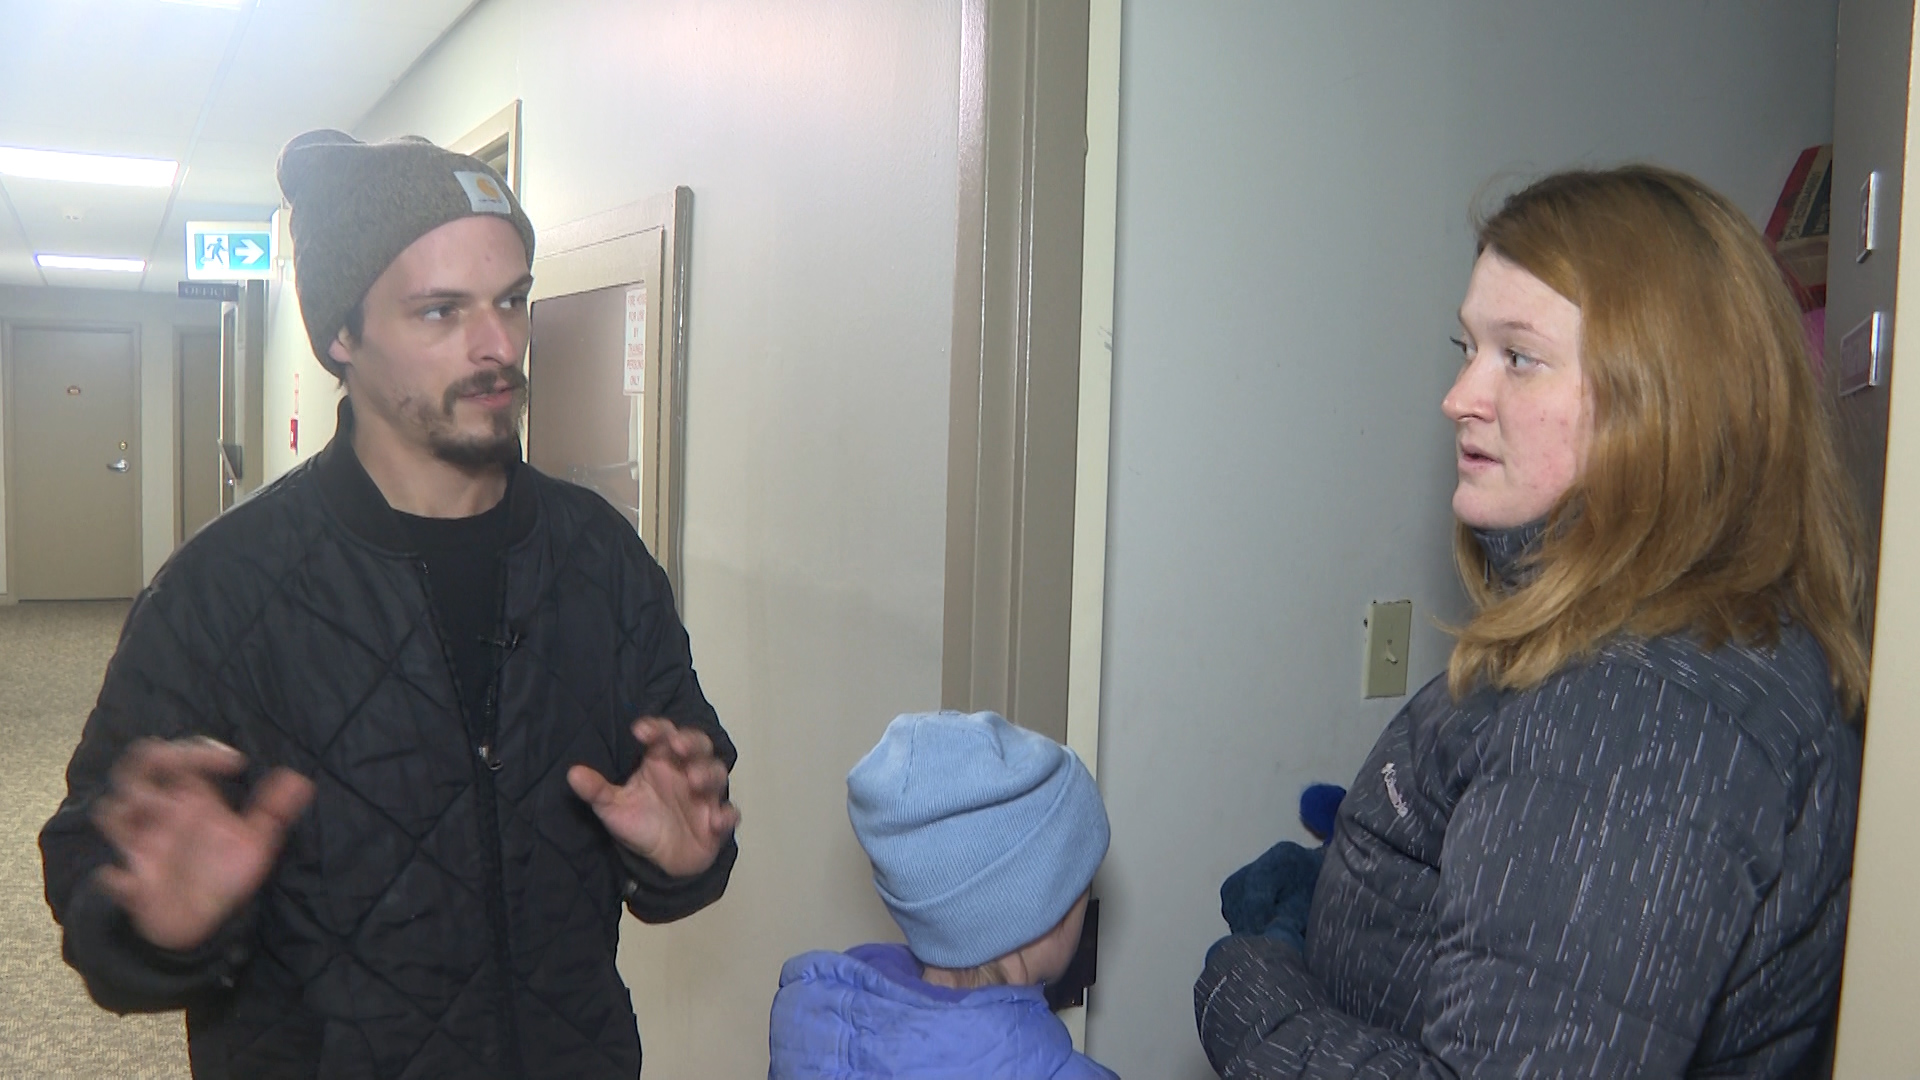 Kingston family still seeks answers after Christmas gifts stolen